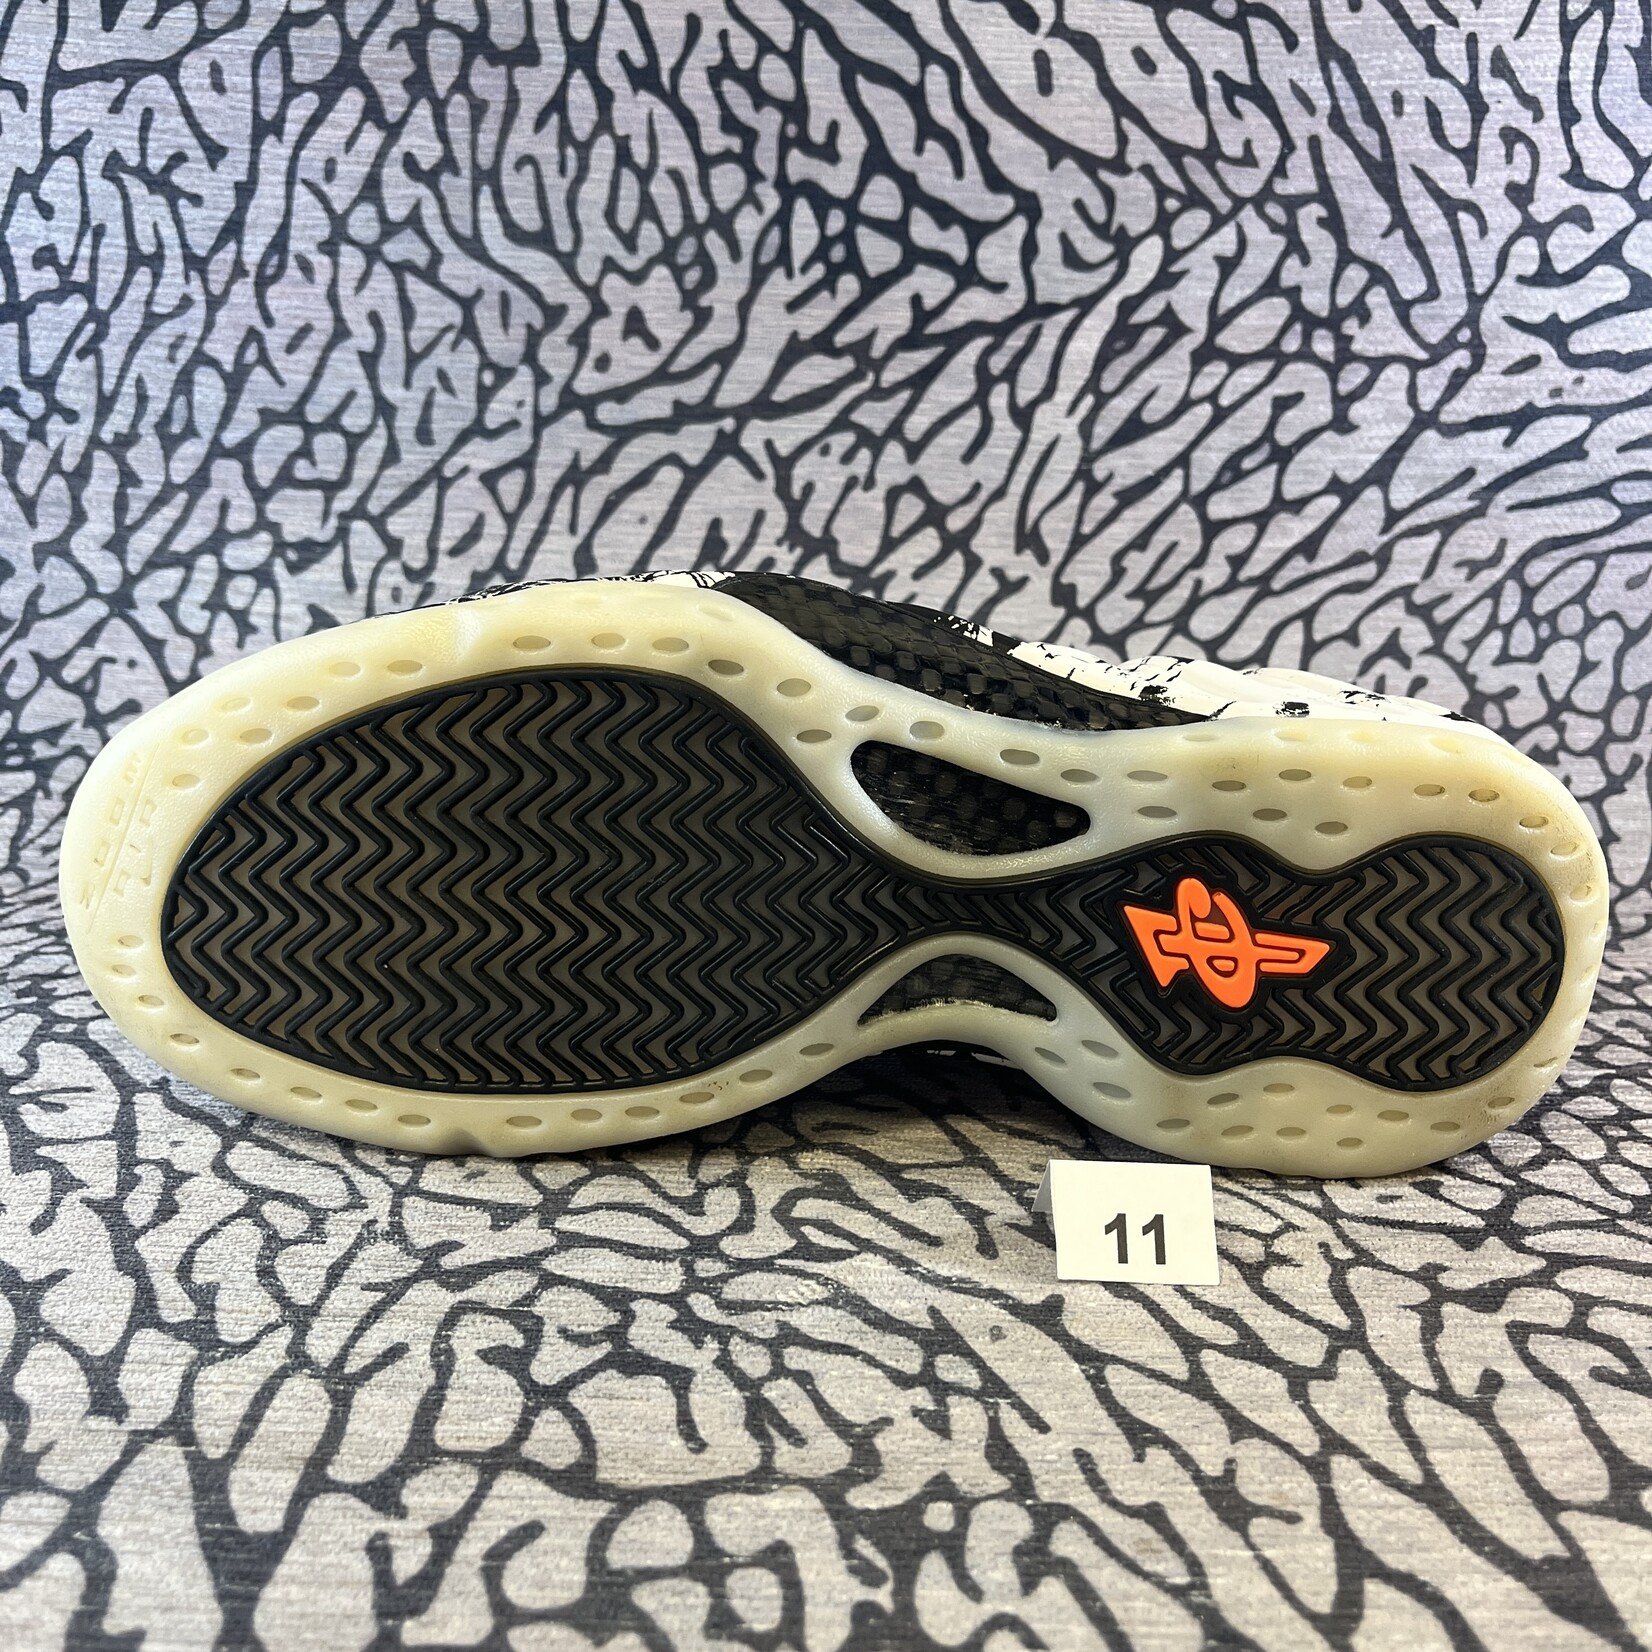 Nike Pre-owned Nike Air Foamposite One Shattered Backboard Rep Insoles